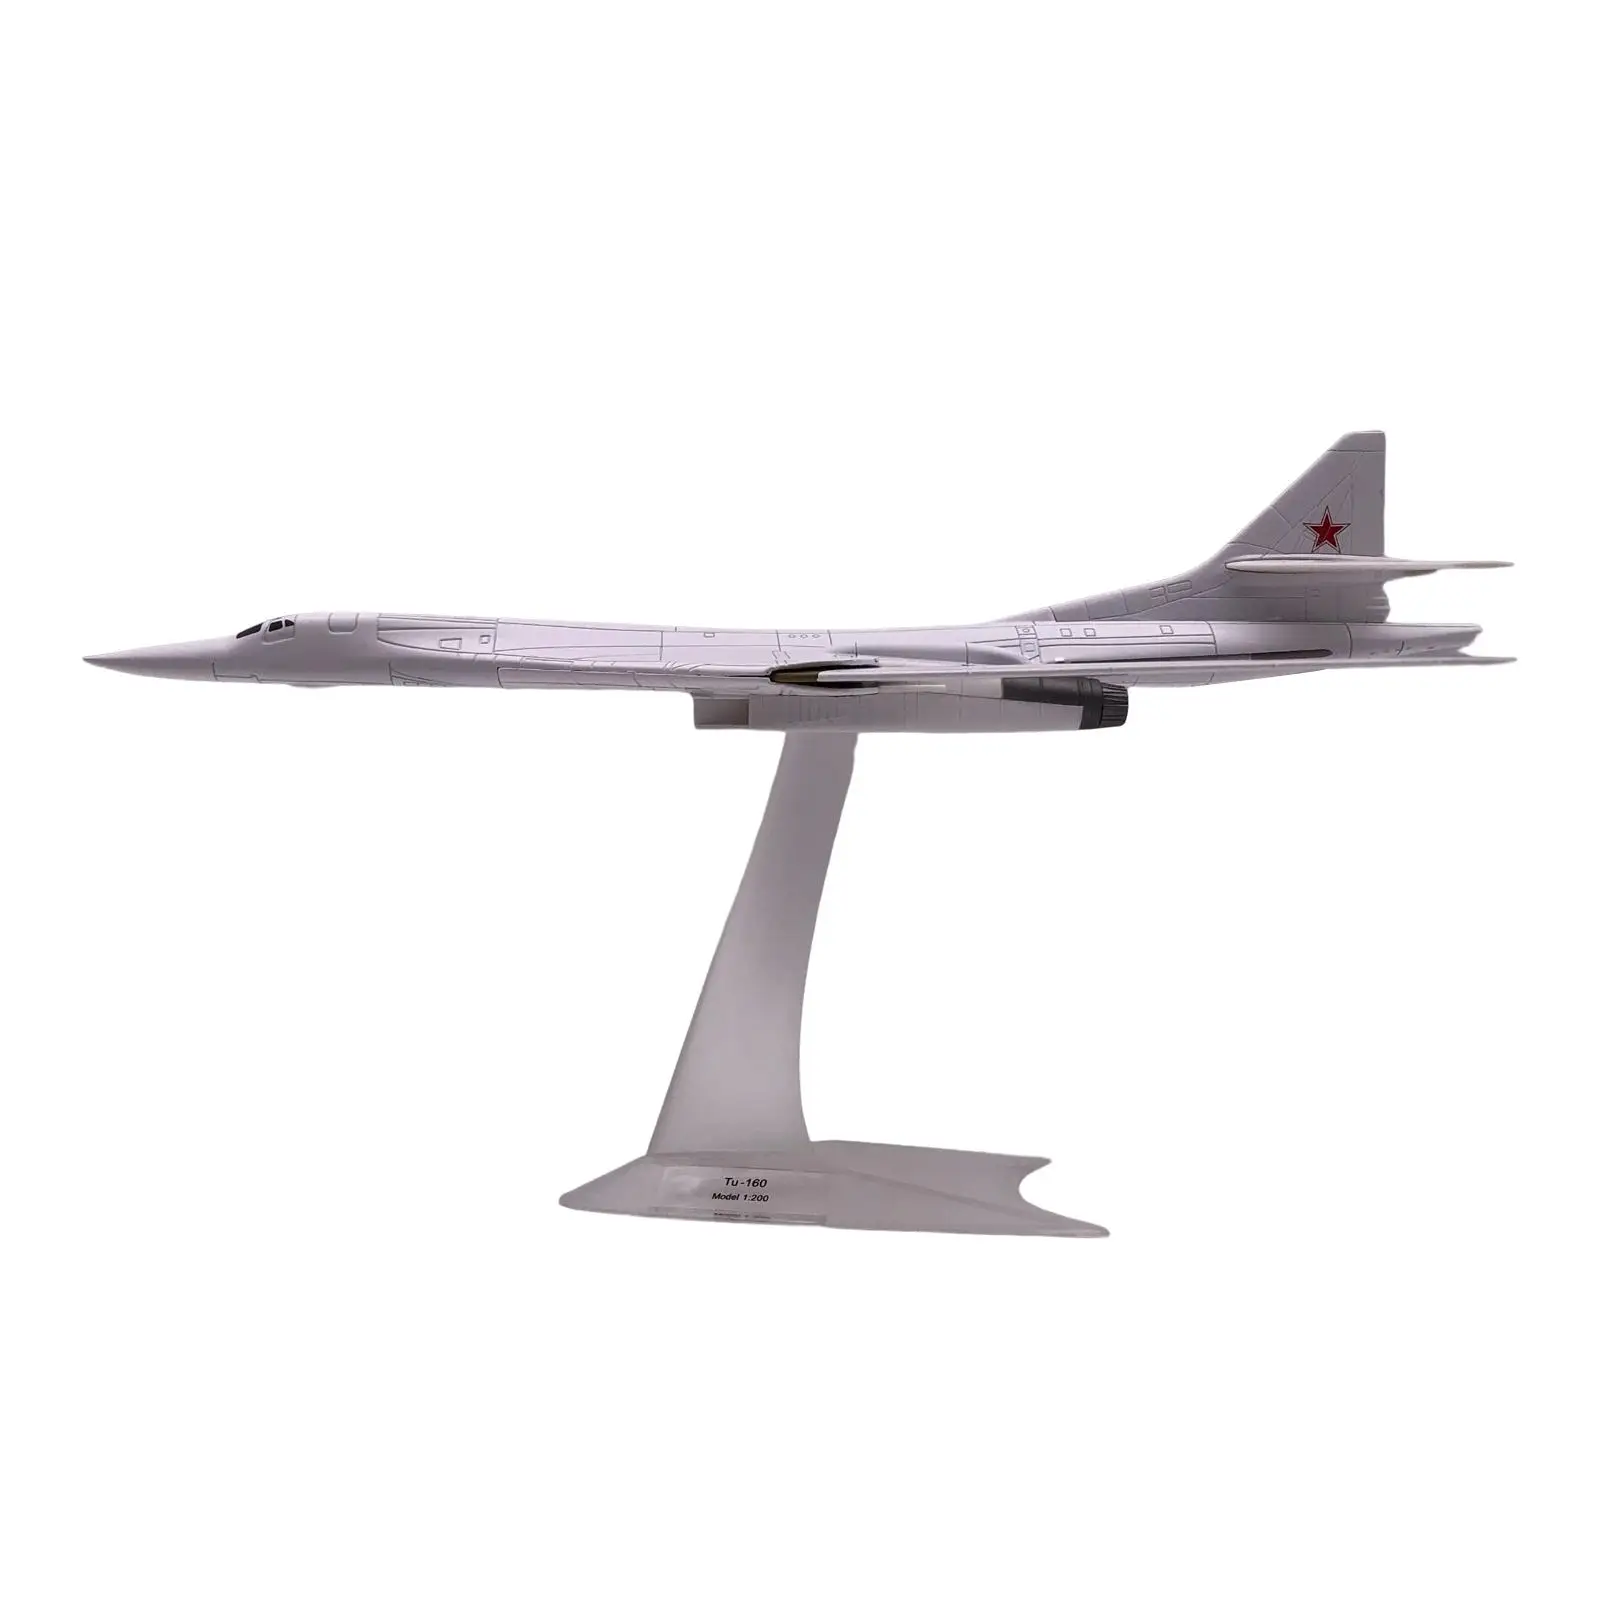 3D Bomber Fighter Model Plain Fighter Toy 1:200 Scale Air Planes Diecast